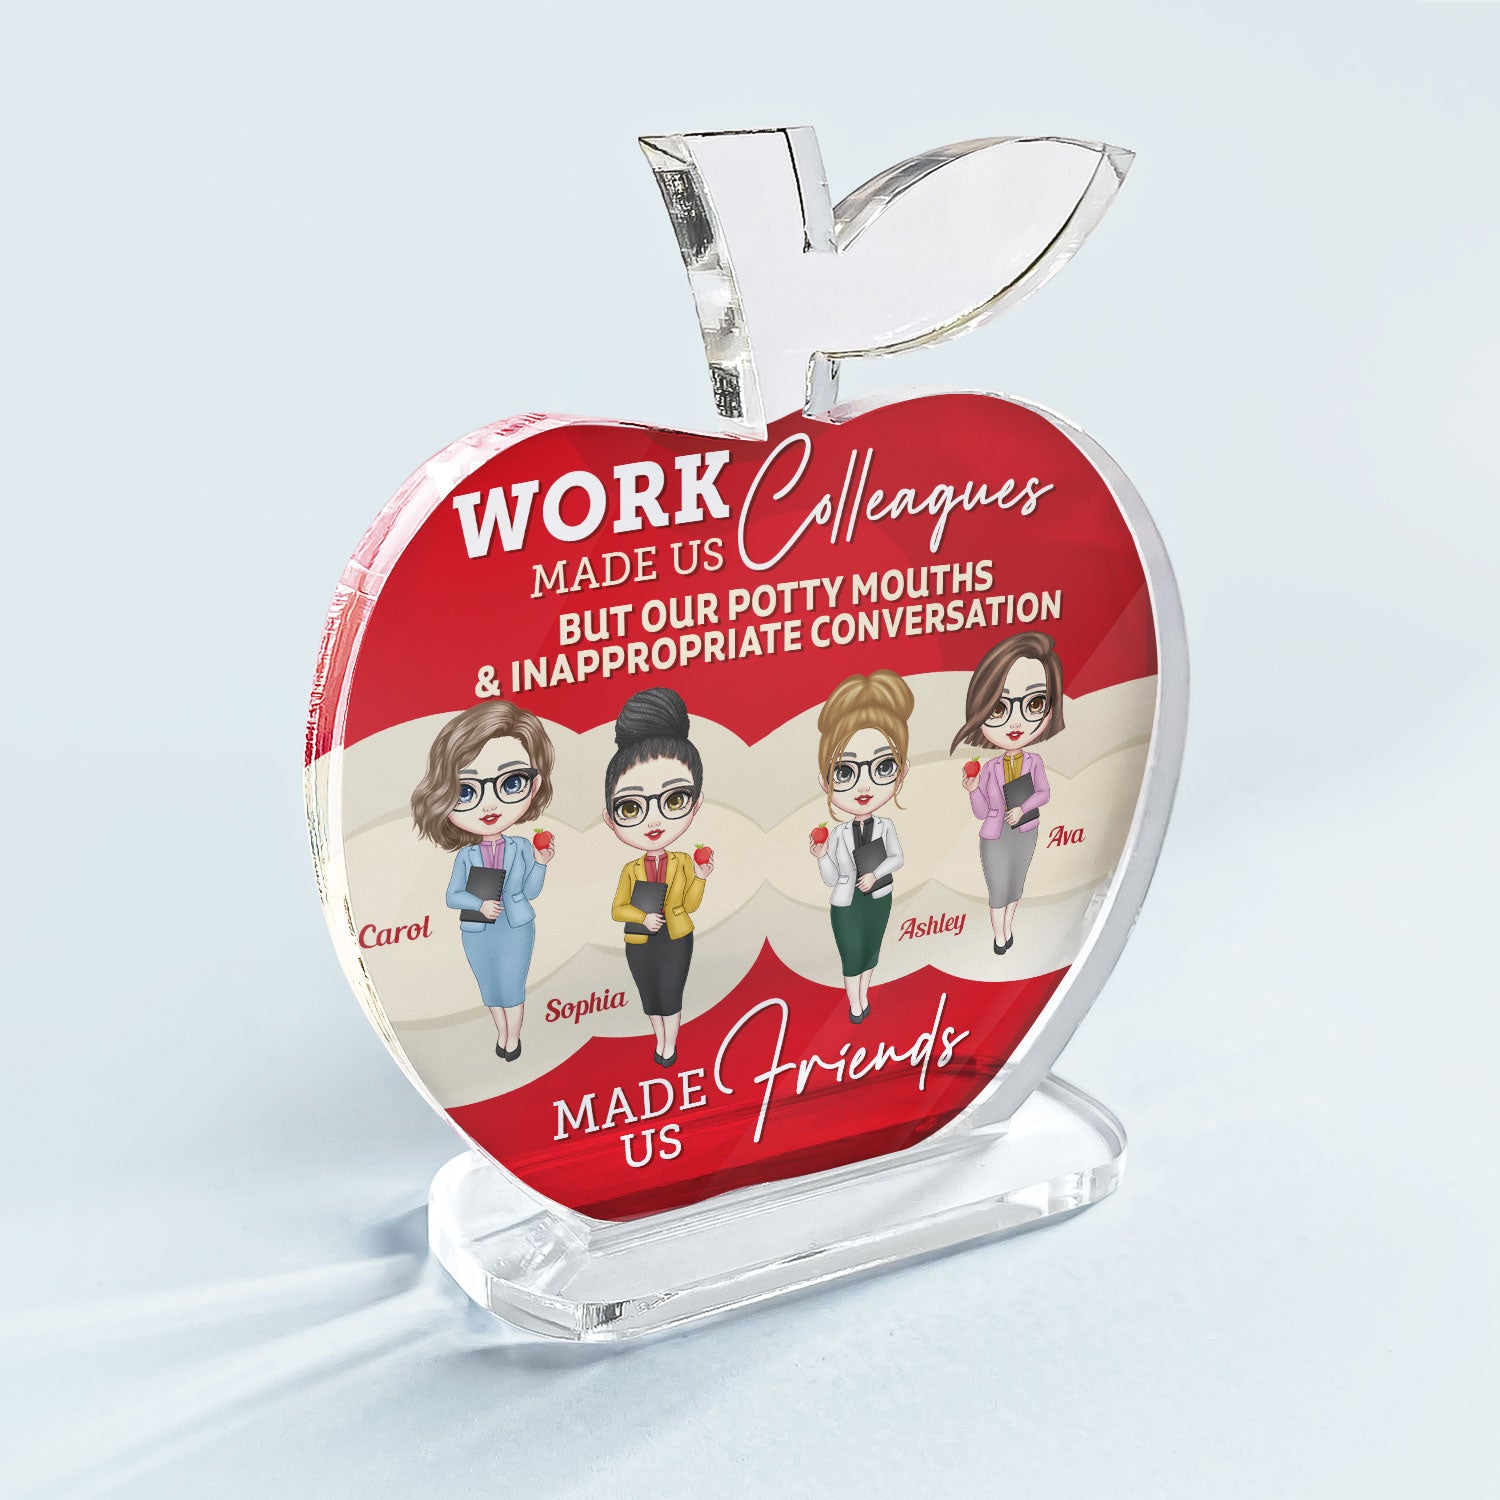 Work Made Us Colleagues - Personalized Apple Shaped Acrylic Plaque - Birthday, Funny, Desk Decor Gift For Teachers, Teacher Assistants, Coworkers, Colleagues